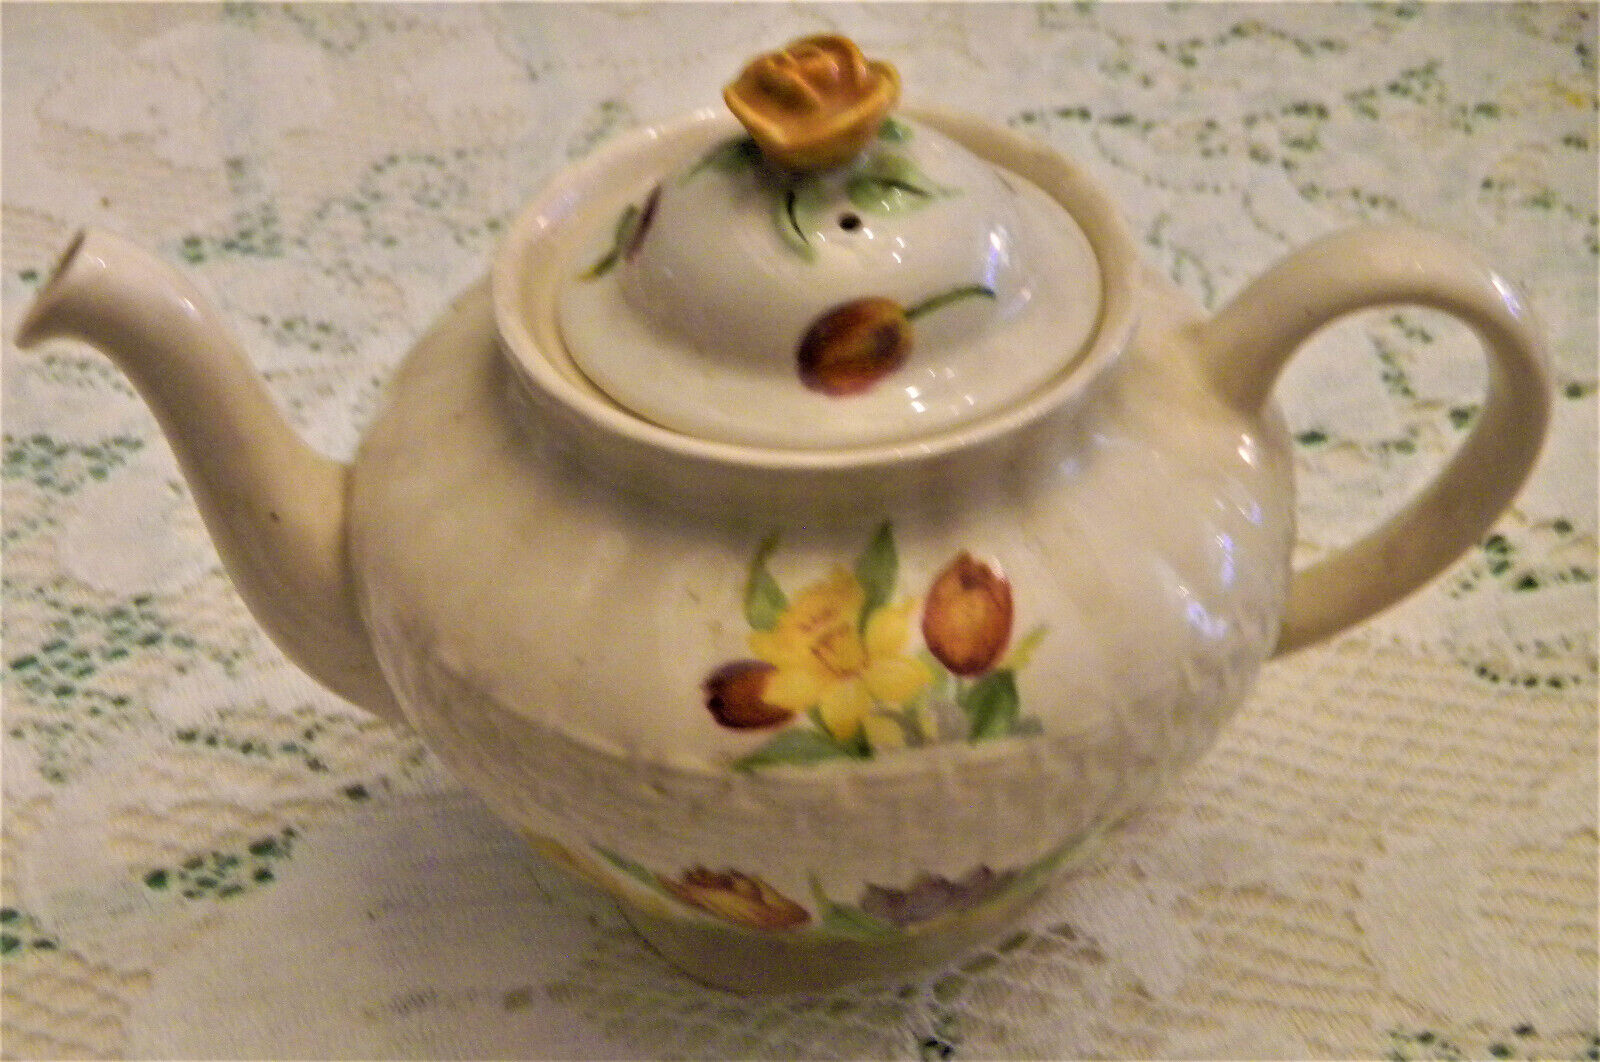 SIMPSONS POTTERS – SOLIAN WARE – PROVIDENCE – ROSE FINIAL LIDDED TEAPOT